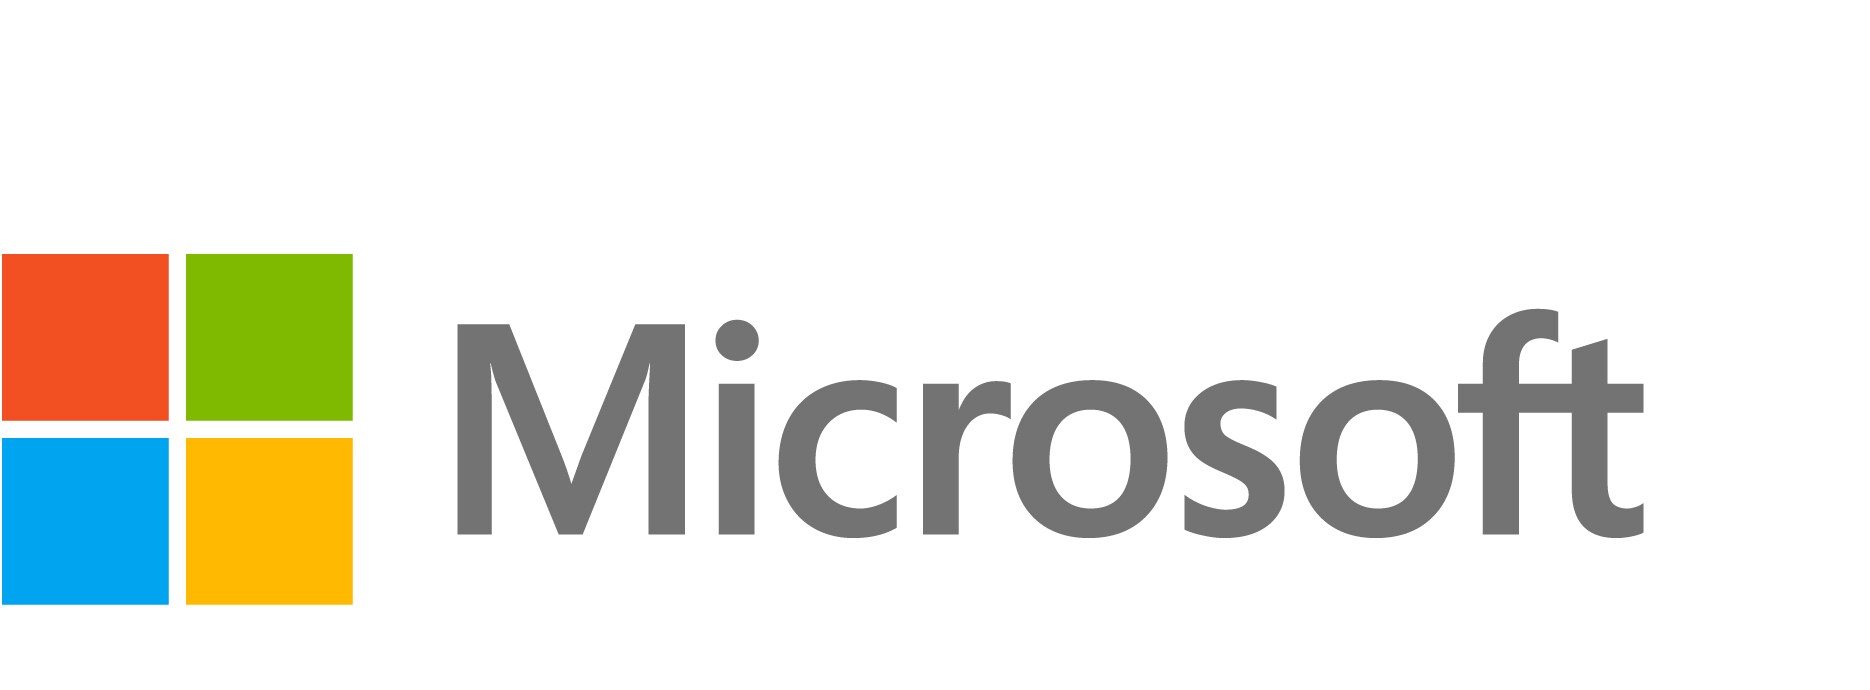 Microsoft Extended Hardware Service Plan - extended service agreement - 2 years - shipment